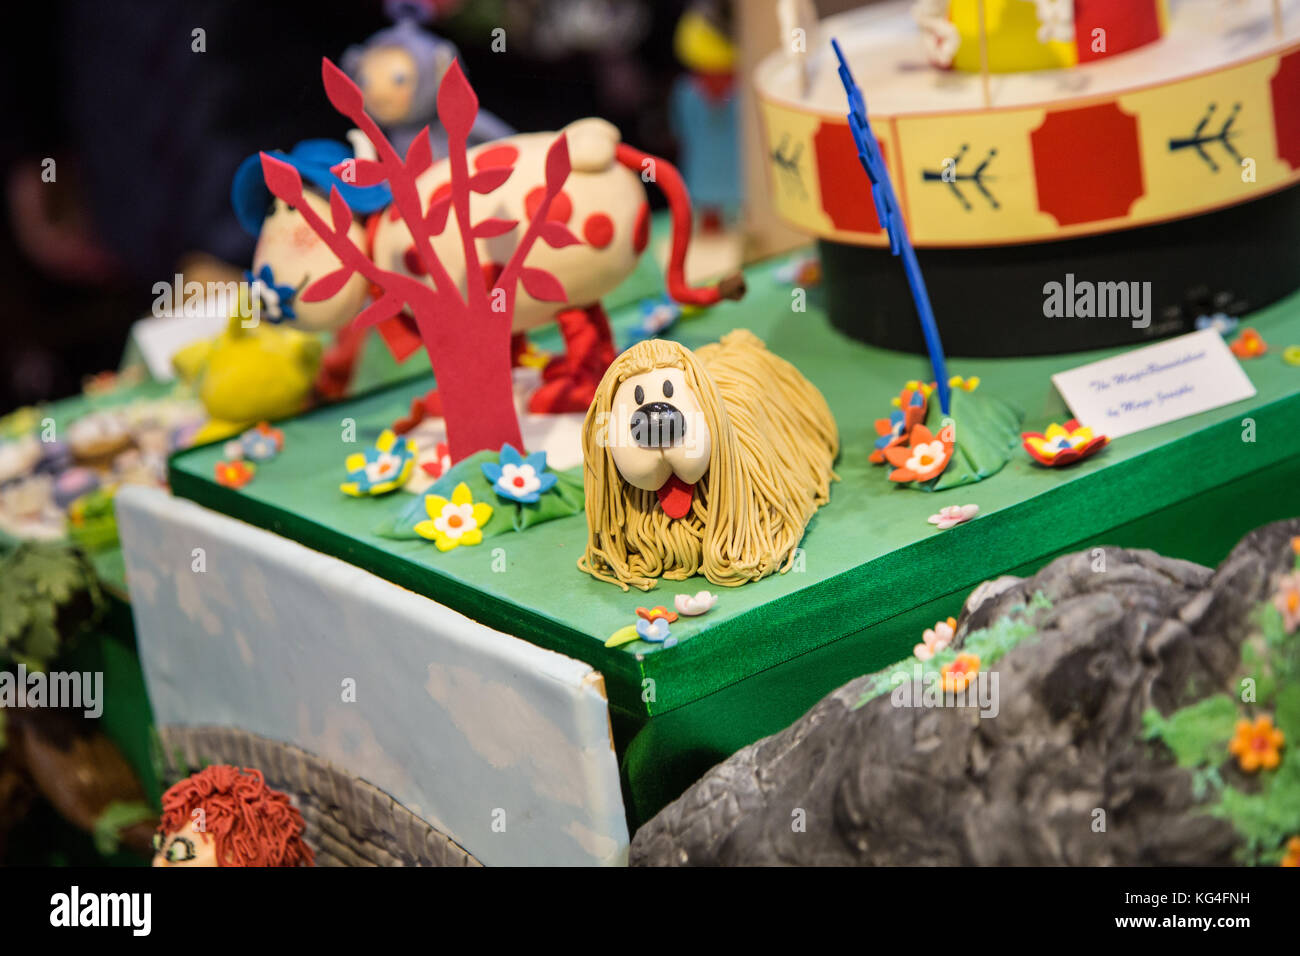 Birmingham, UK. 04th Nov, 2017. Cake International at the NEC where master cake bakers and decorators compete for best cakes in various categories to win gold Credit: steven roe/Alamy Live News Stock Photo